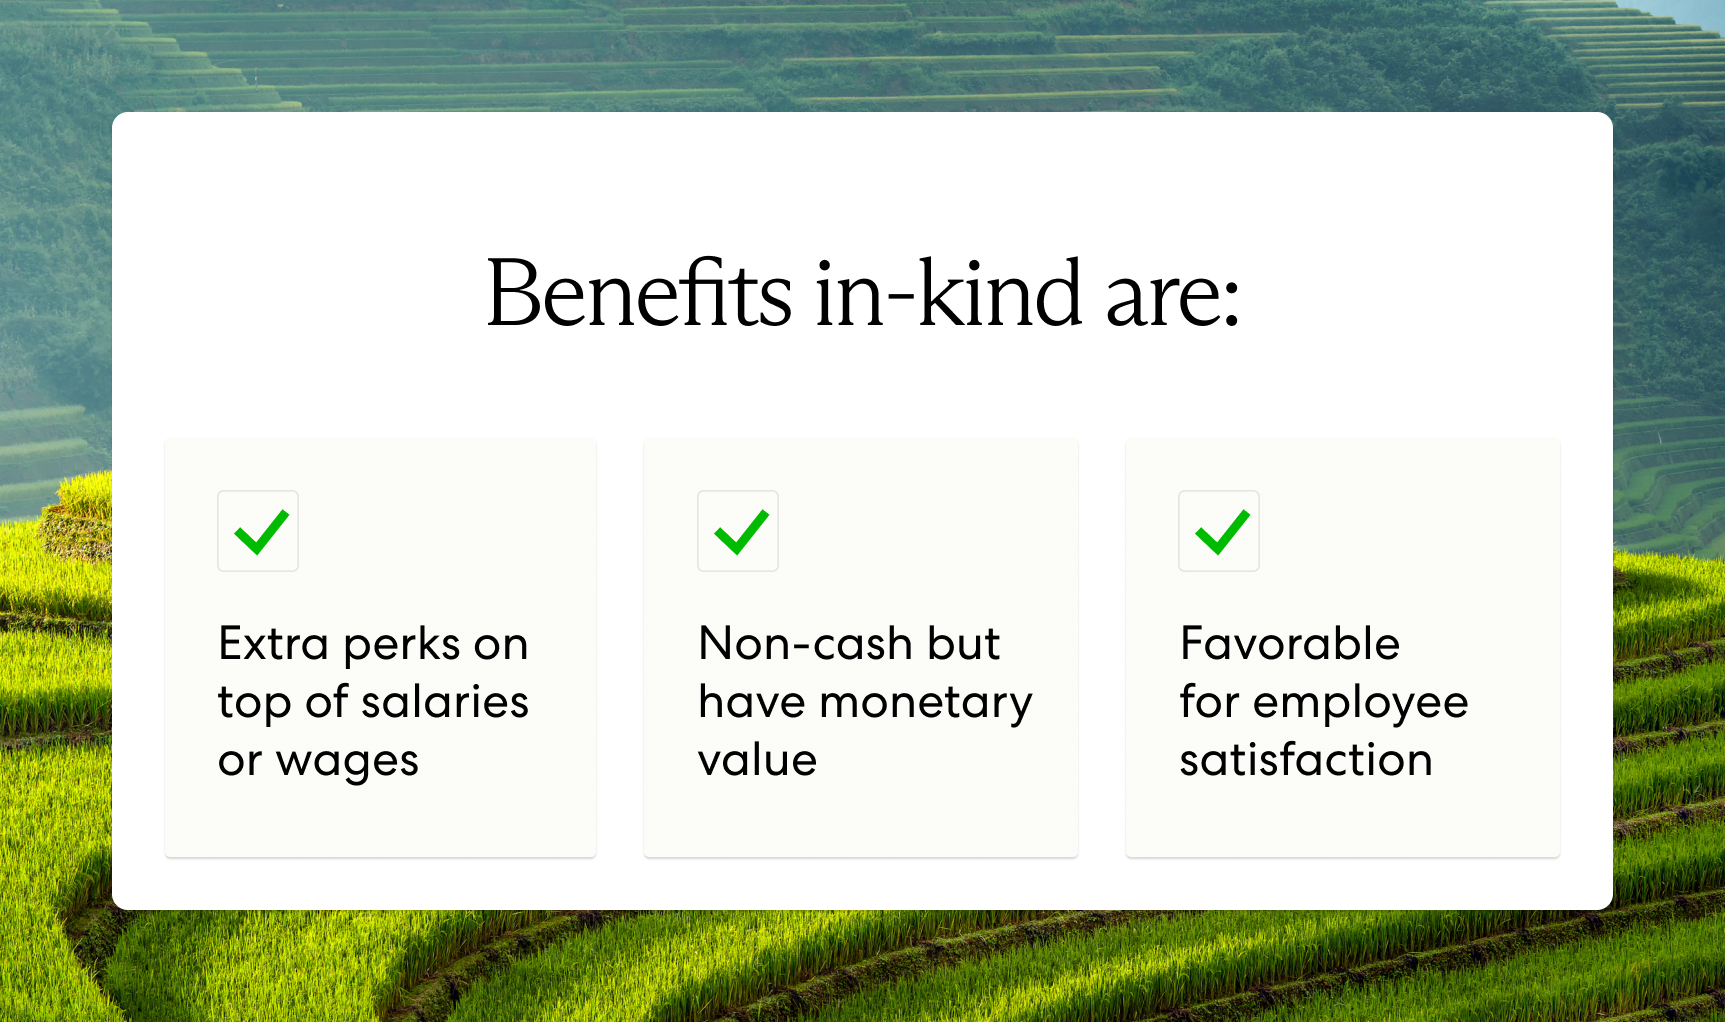 Benefits in kind are: Extra perks on top of salary, non-cash (with monetary value), and good for employee satisfaction.